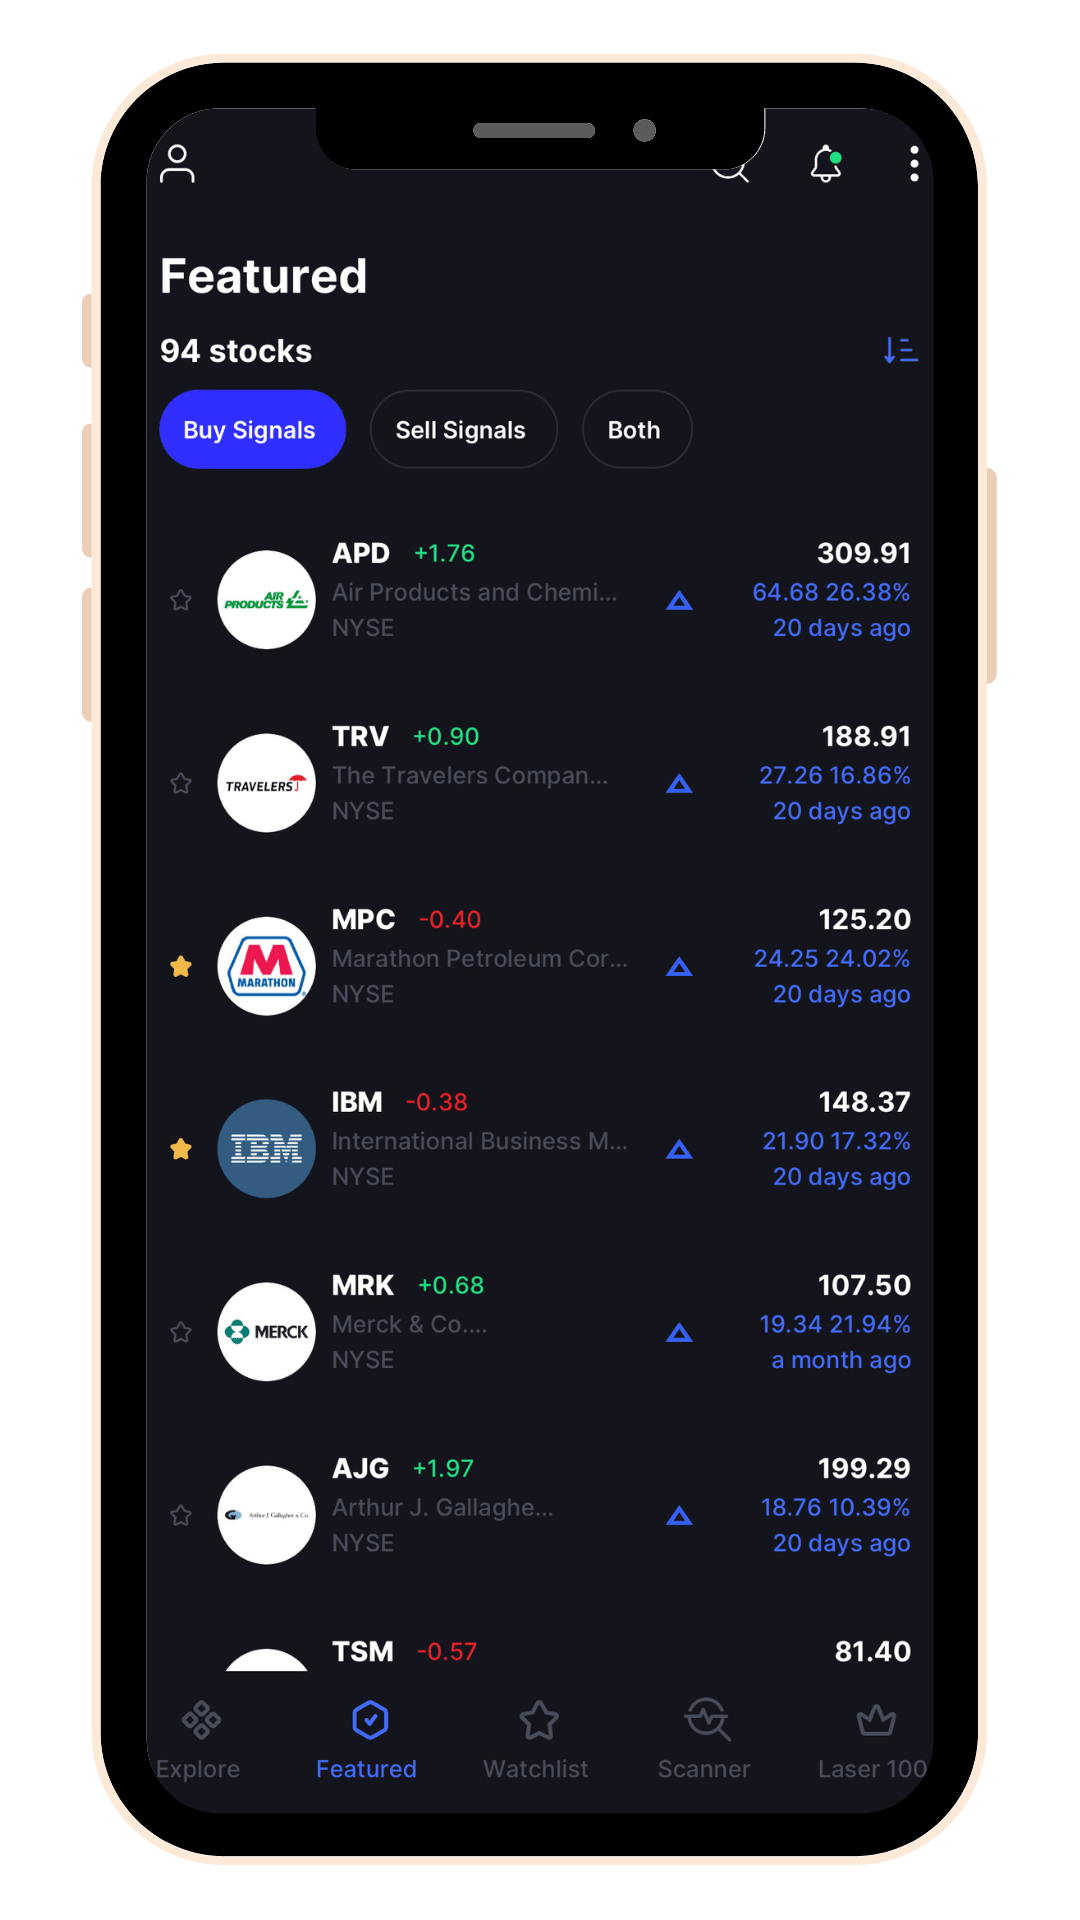 Screenshot of the list of Featured stocks in The Laser app